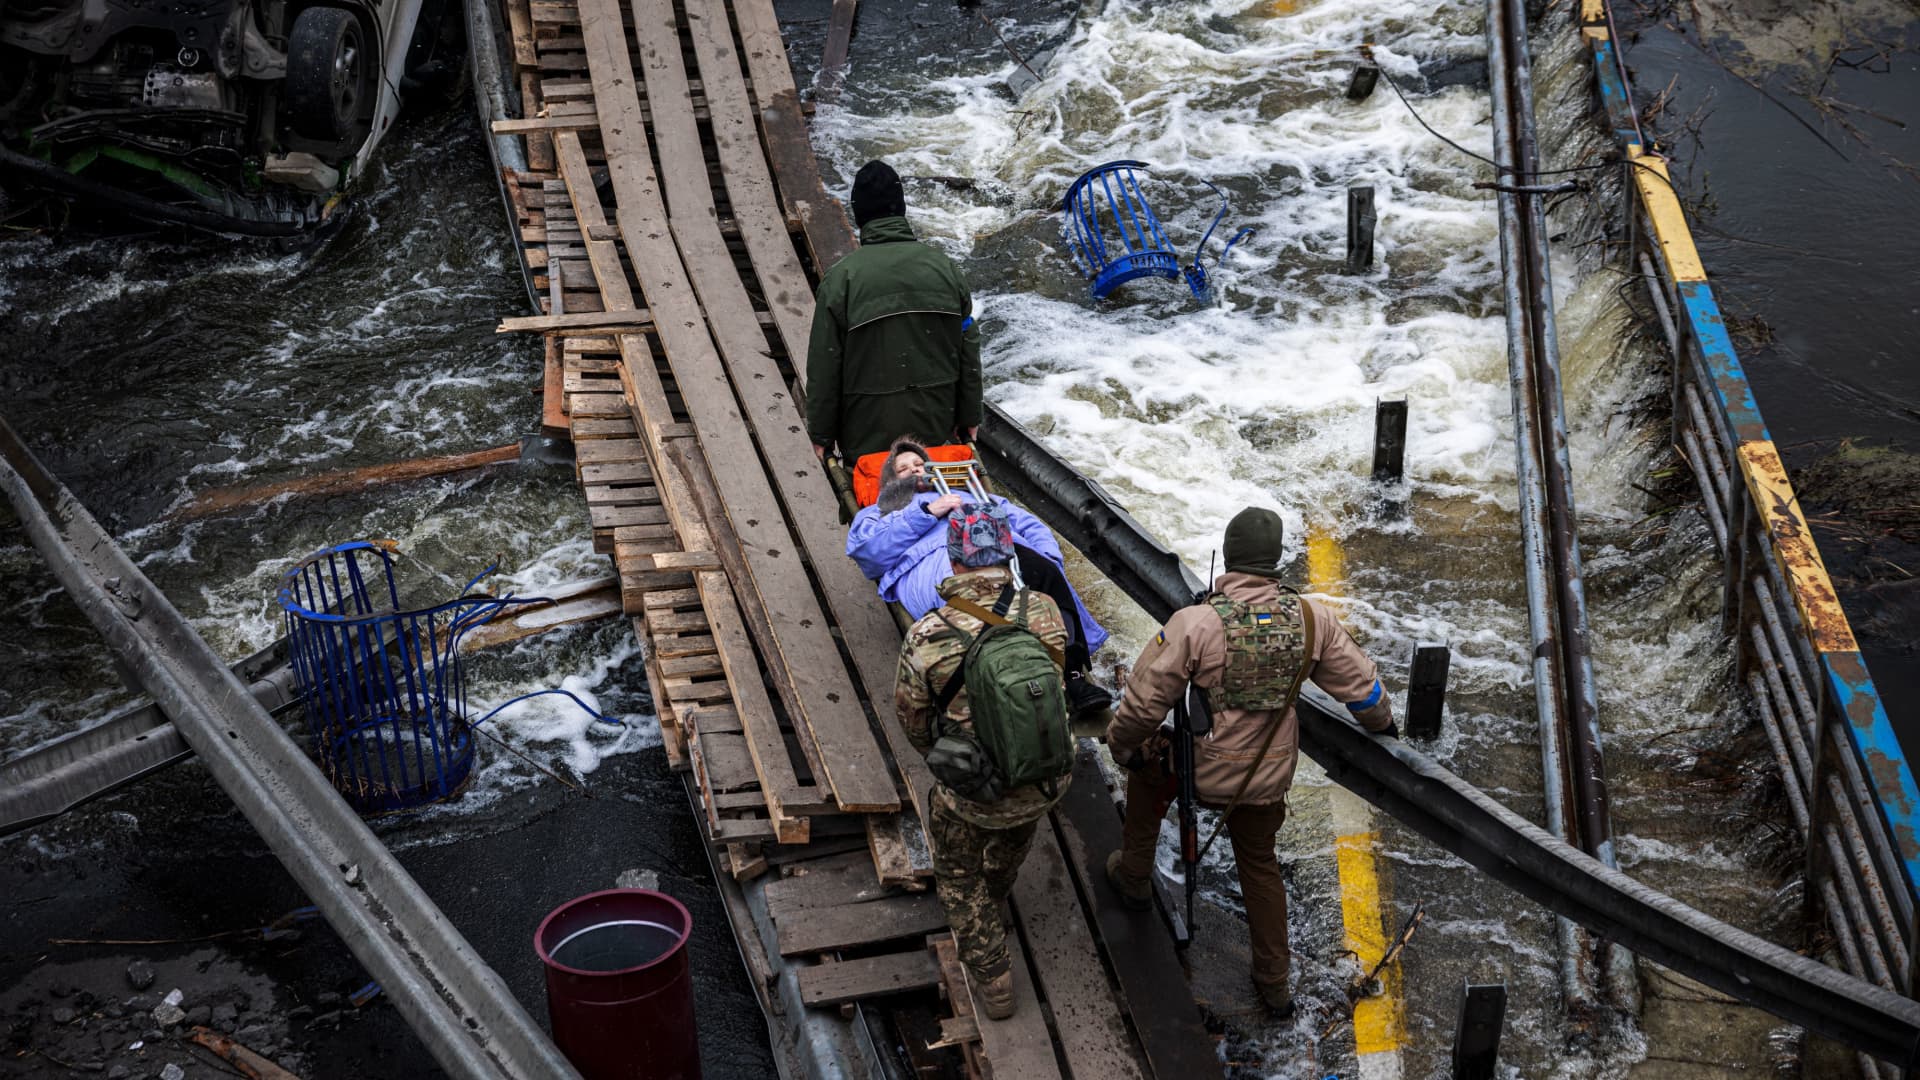 Ukrainian servicemen carry an elderly woman on a stretcher on a makshift pathway to cross a river next to a destroyed bridge as people flee the city of Irpin, northwest of Kyiv, on March 13, 2022.